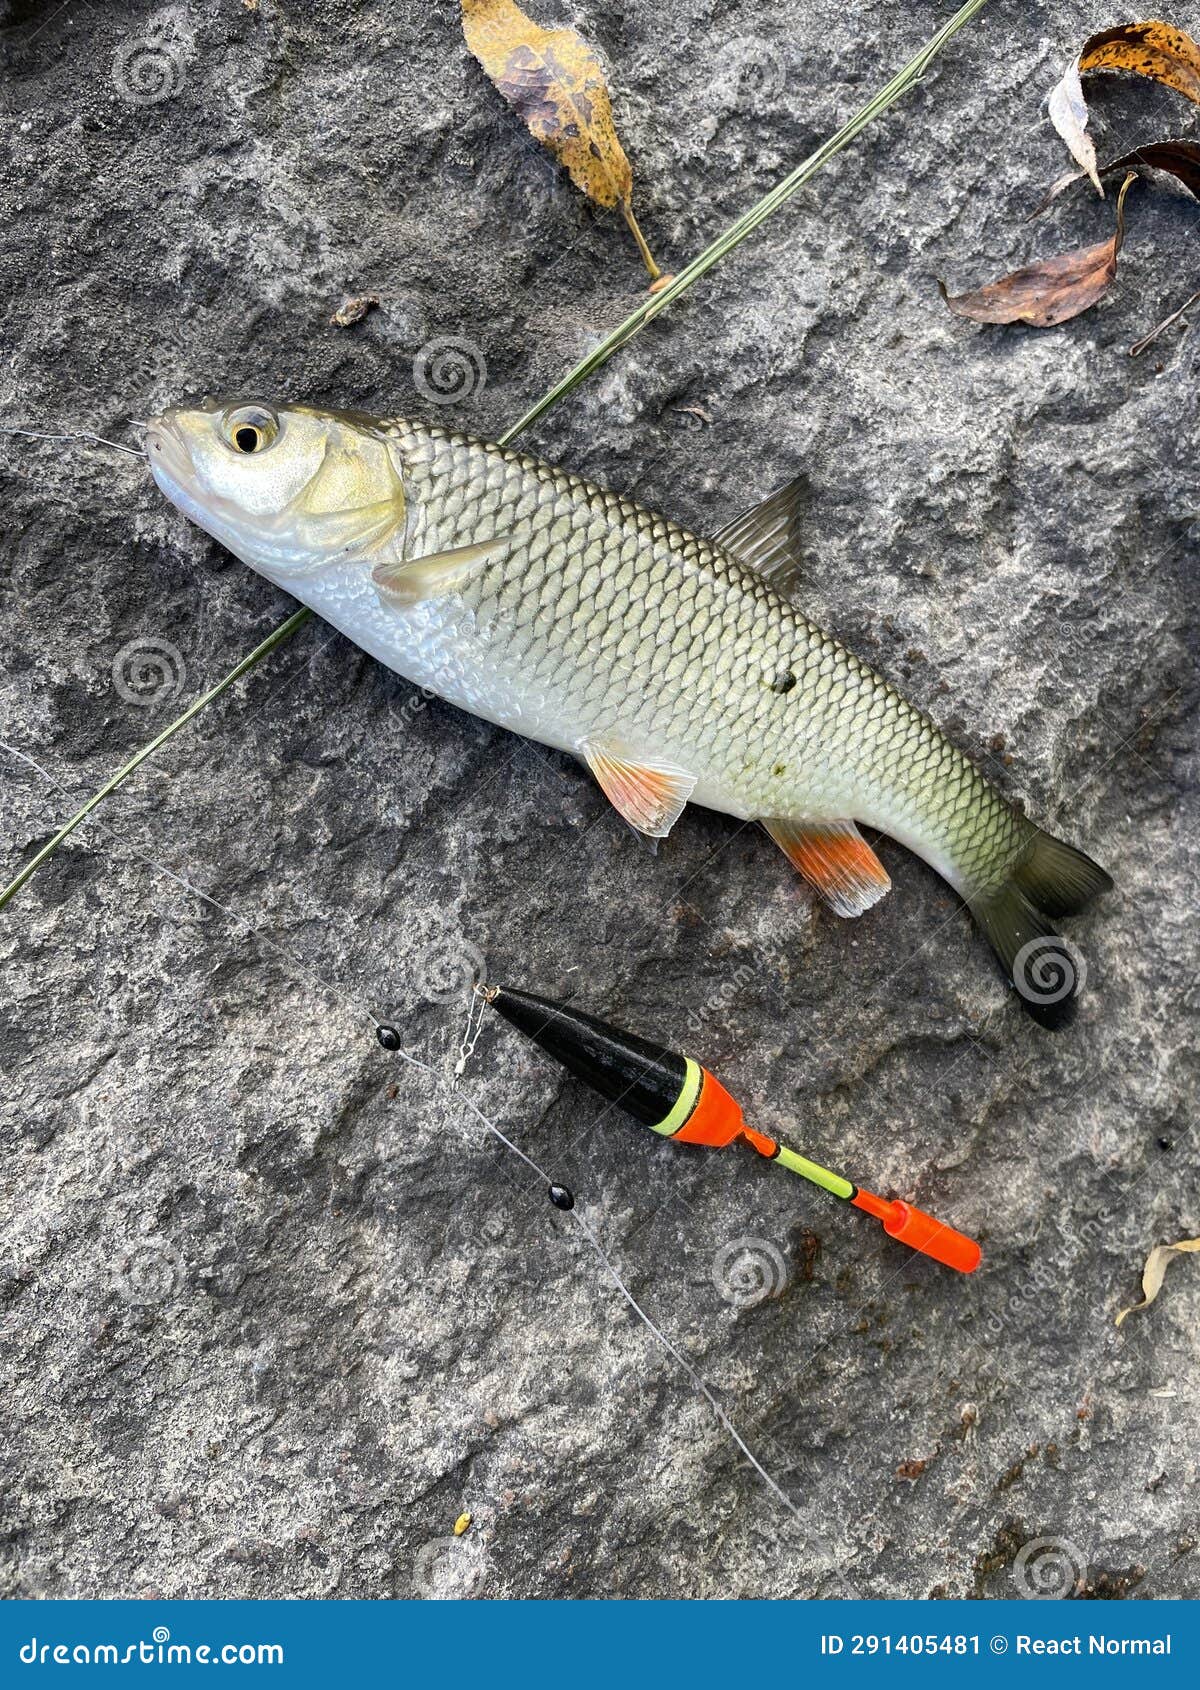 Fishing Big Chub in the Small River Stock Image - Image of fish, float:  291405481